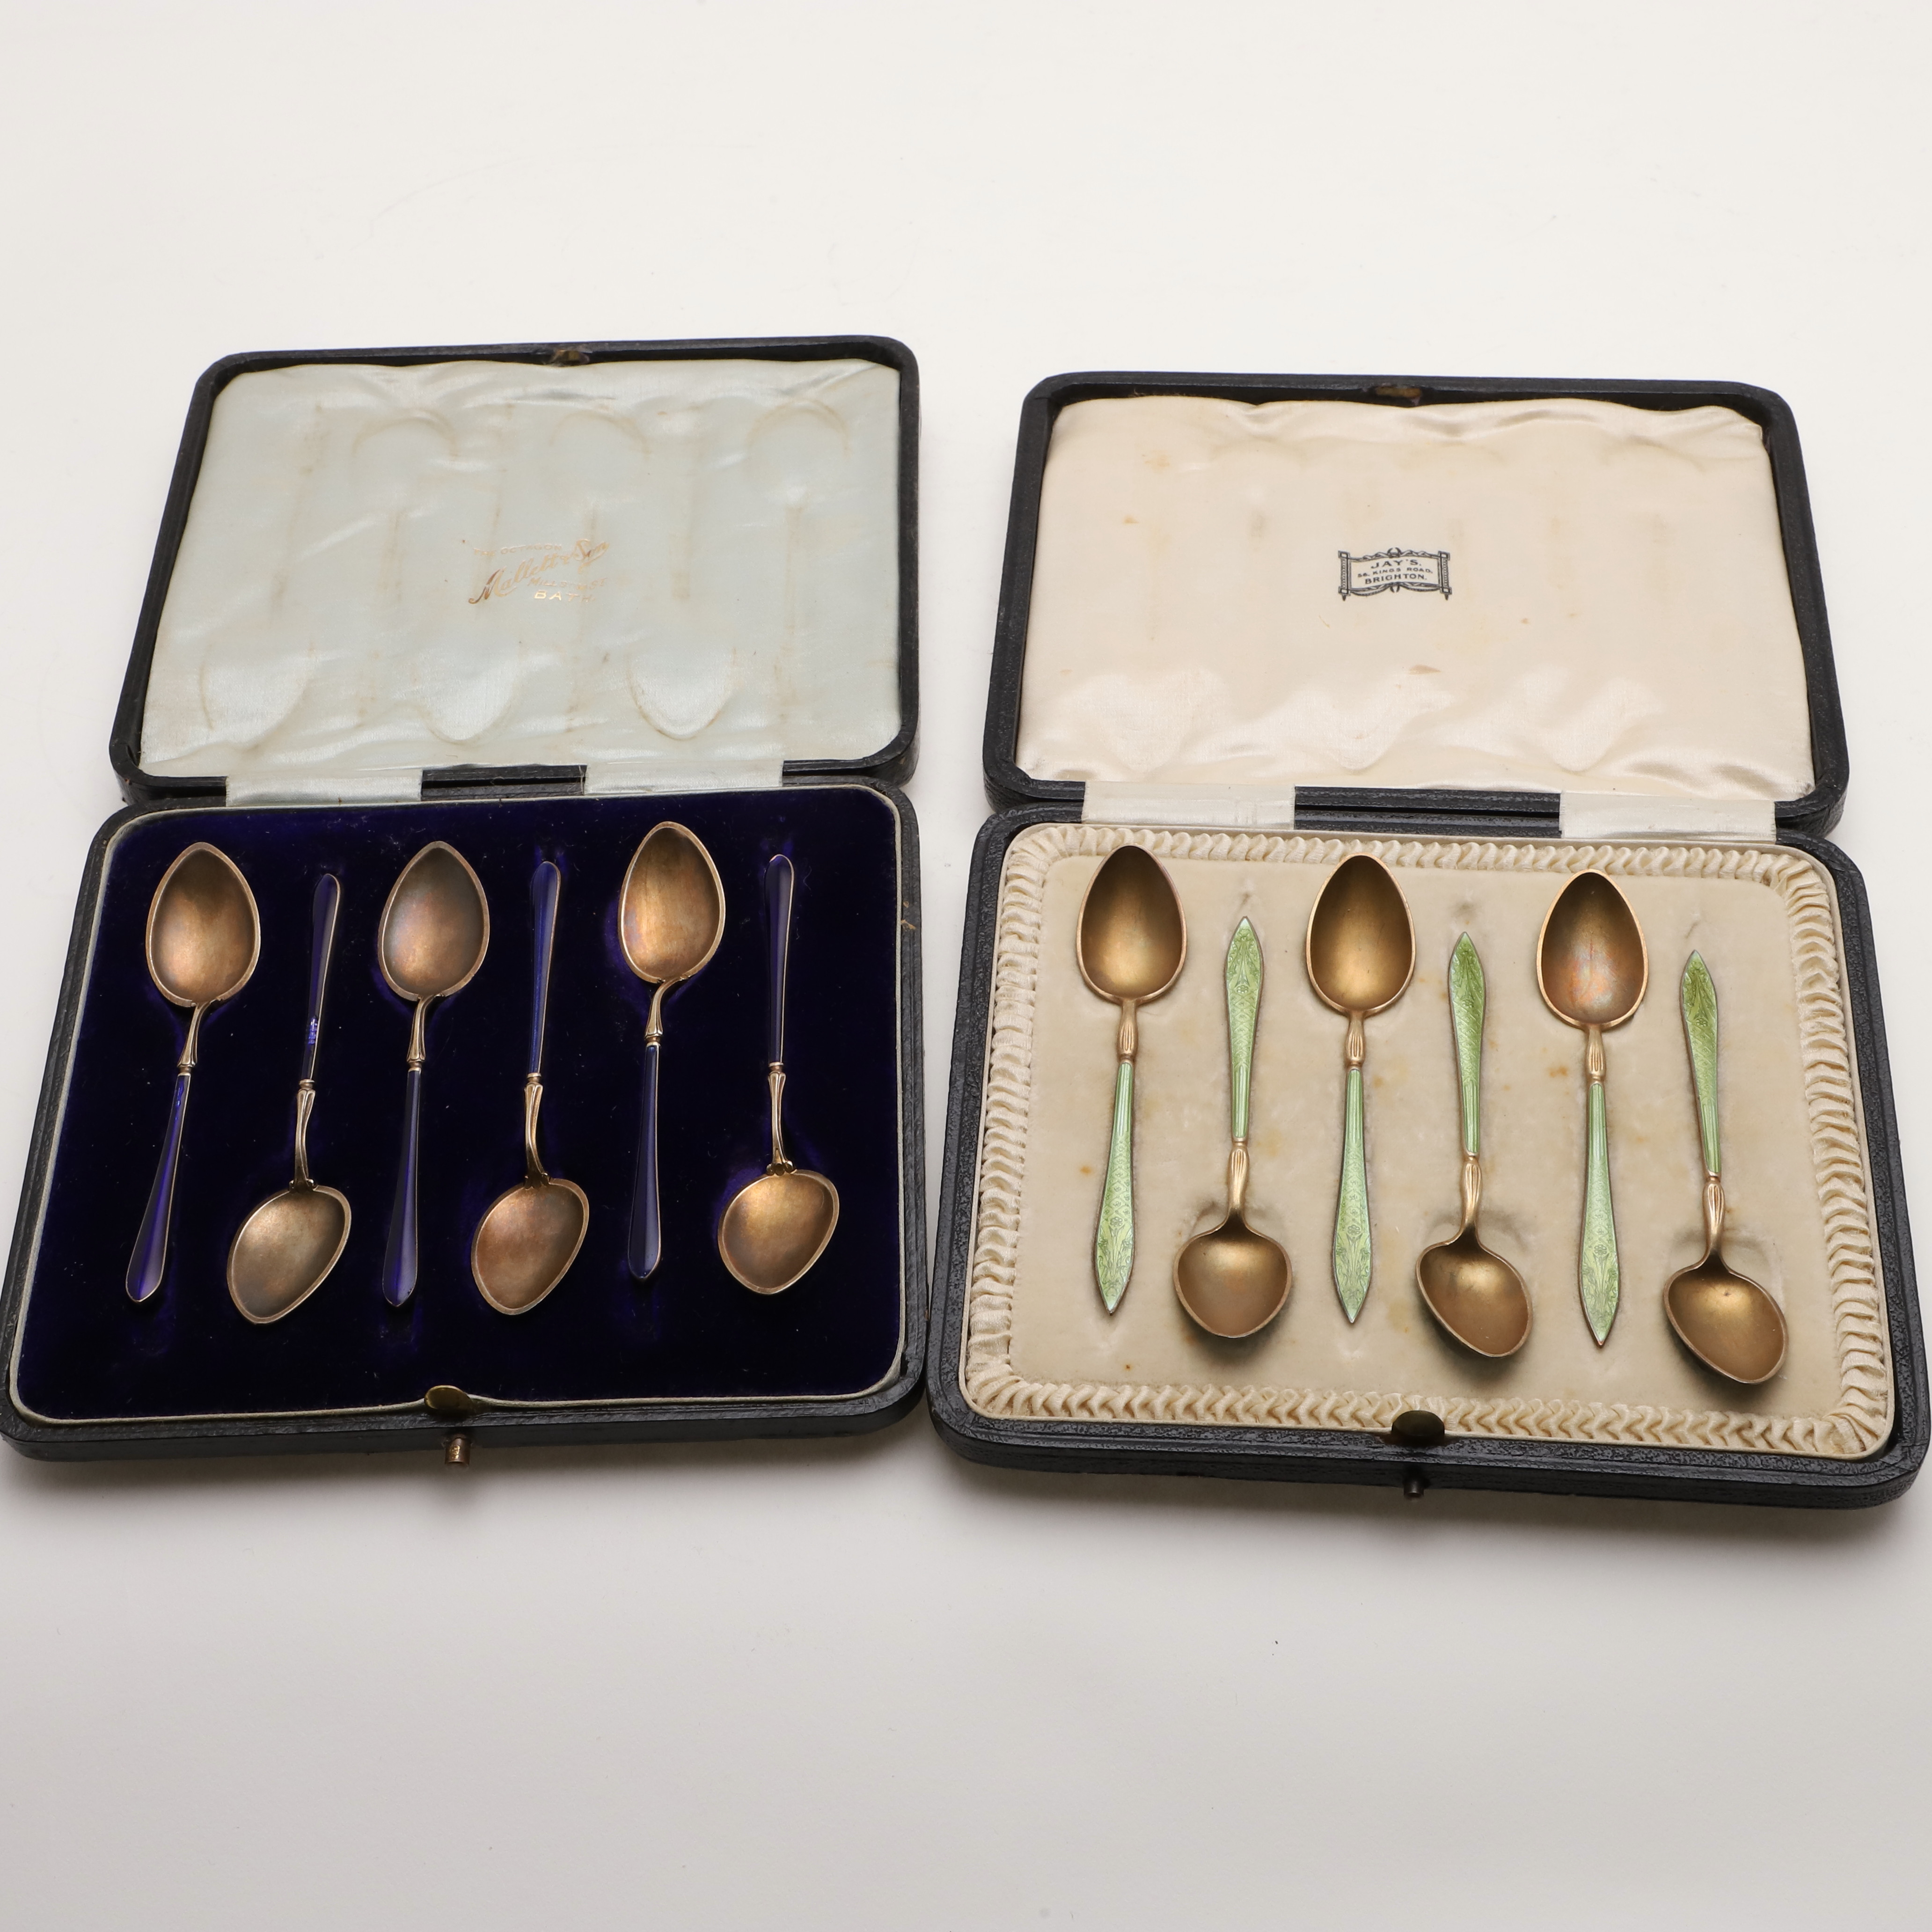 TWO CASED SETS OF LATE 19TH/ EARLY 20TH CENTURY NORWEGIAN SILVERGILT & ENAMEL COFFEE SPOONS.